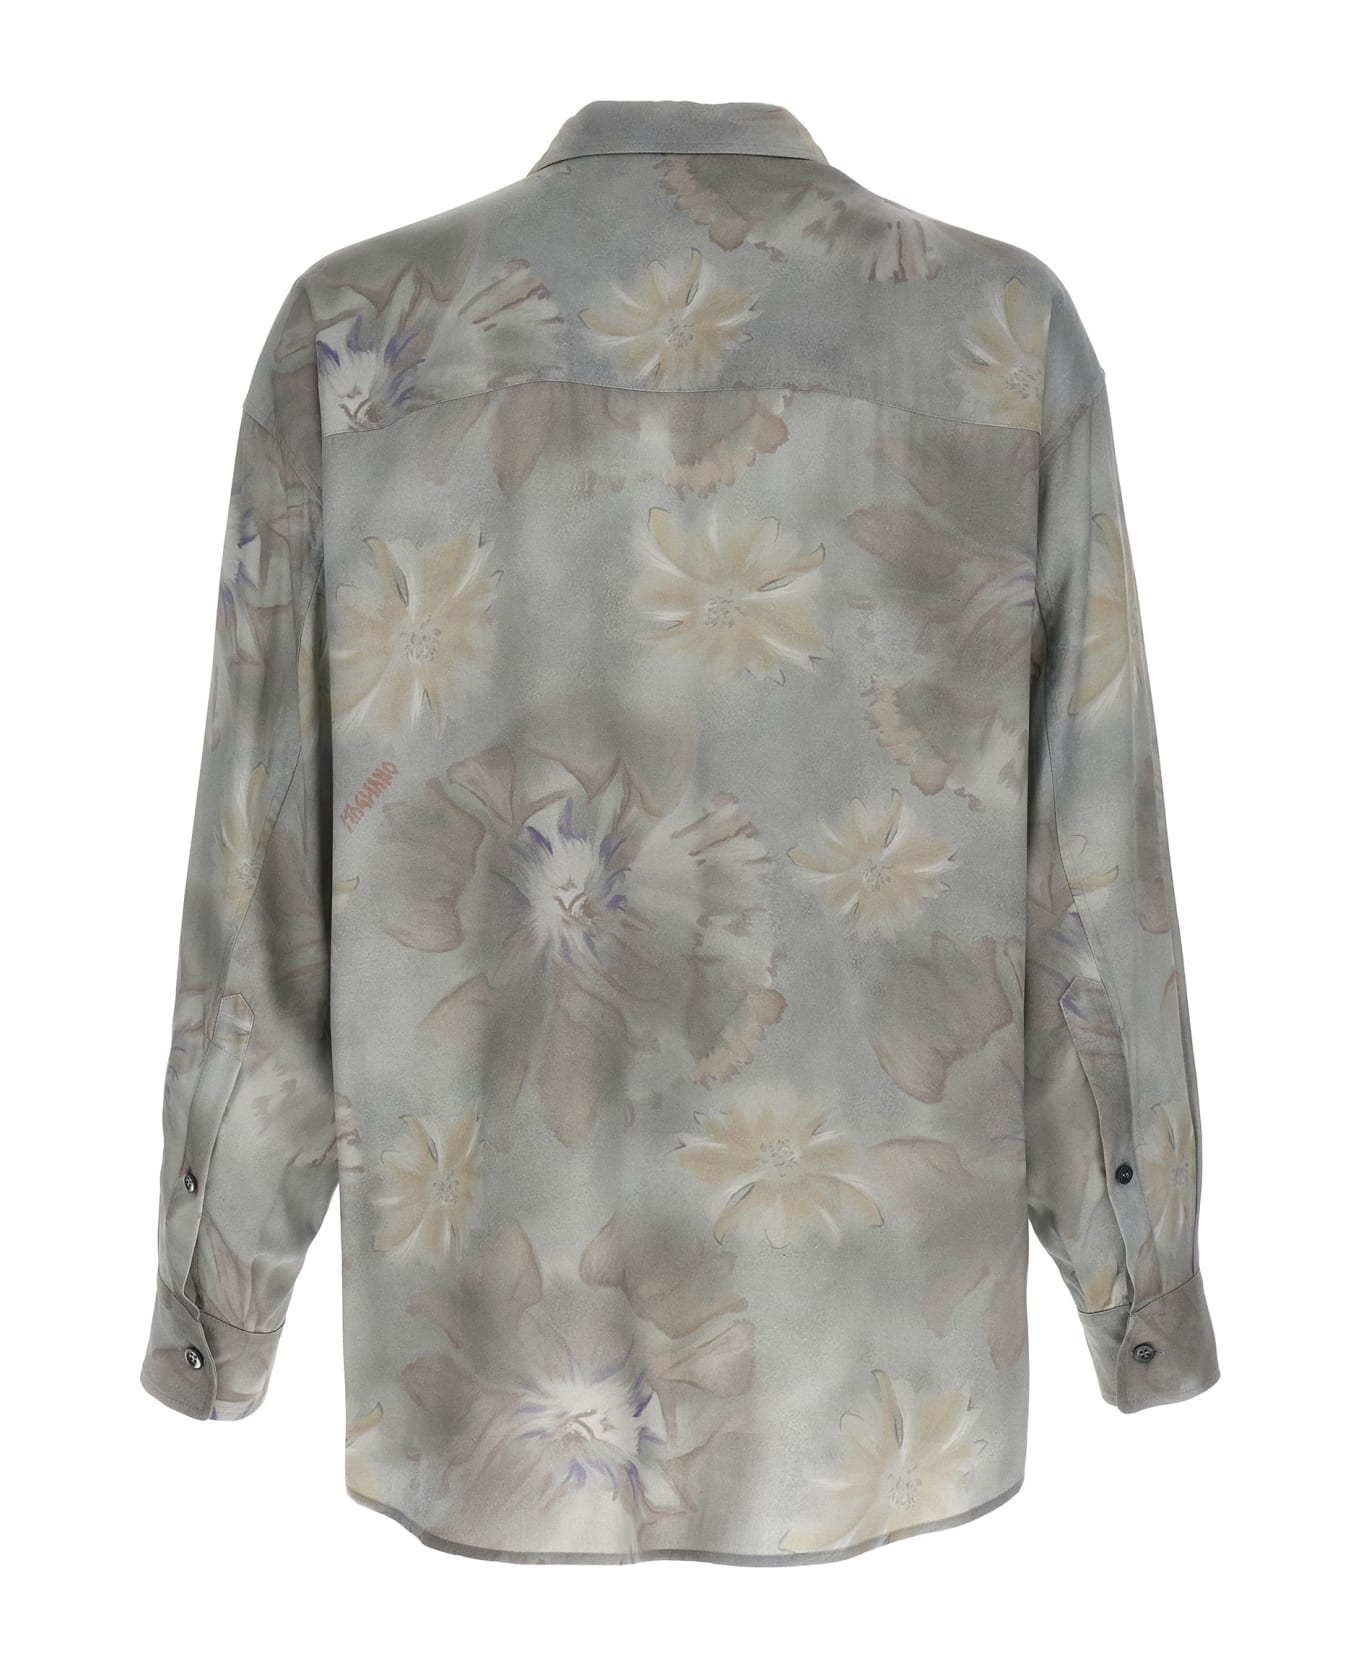 Magliano 'pale Twisted' Shirt - Light Blue